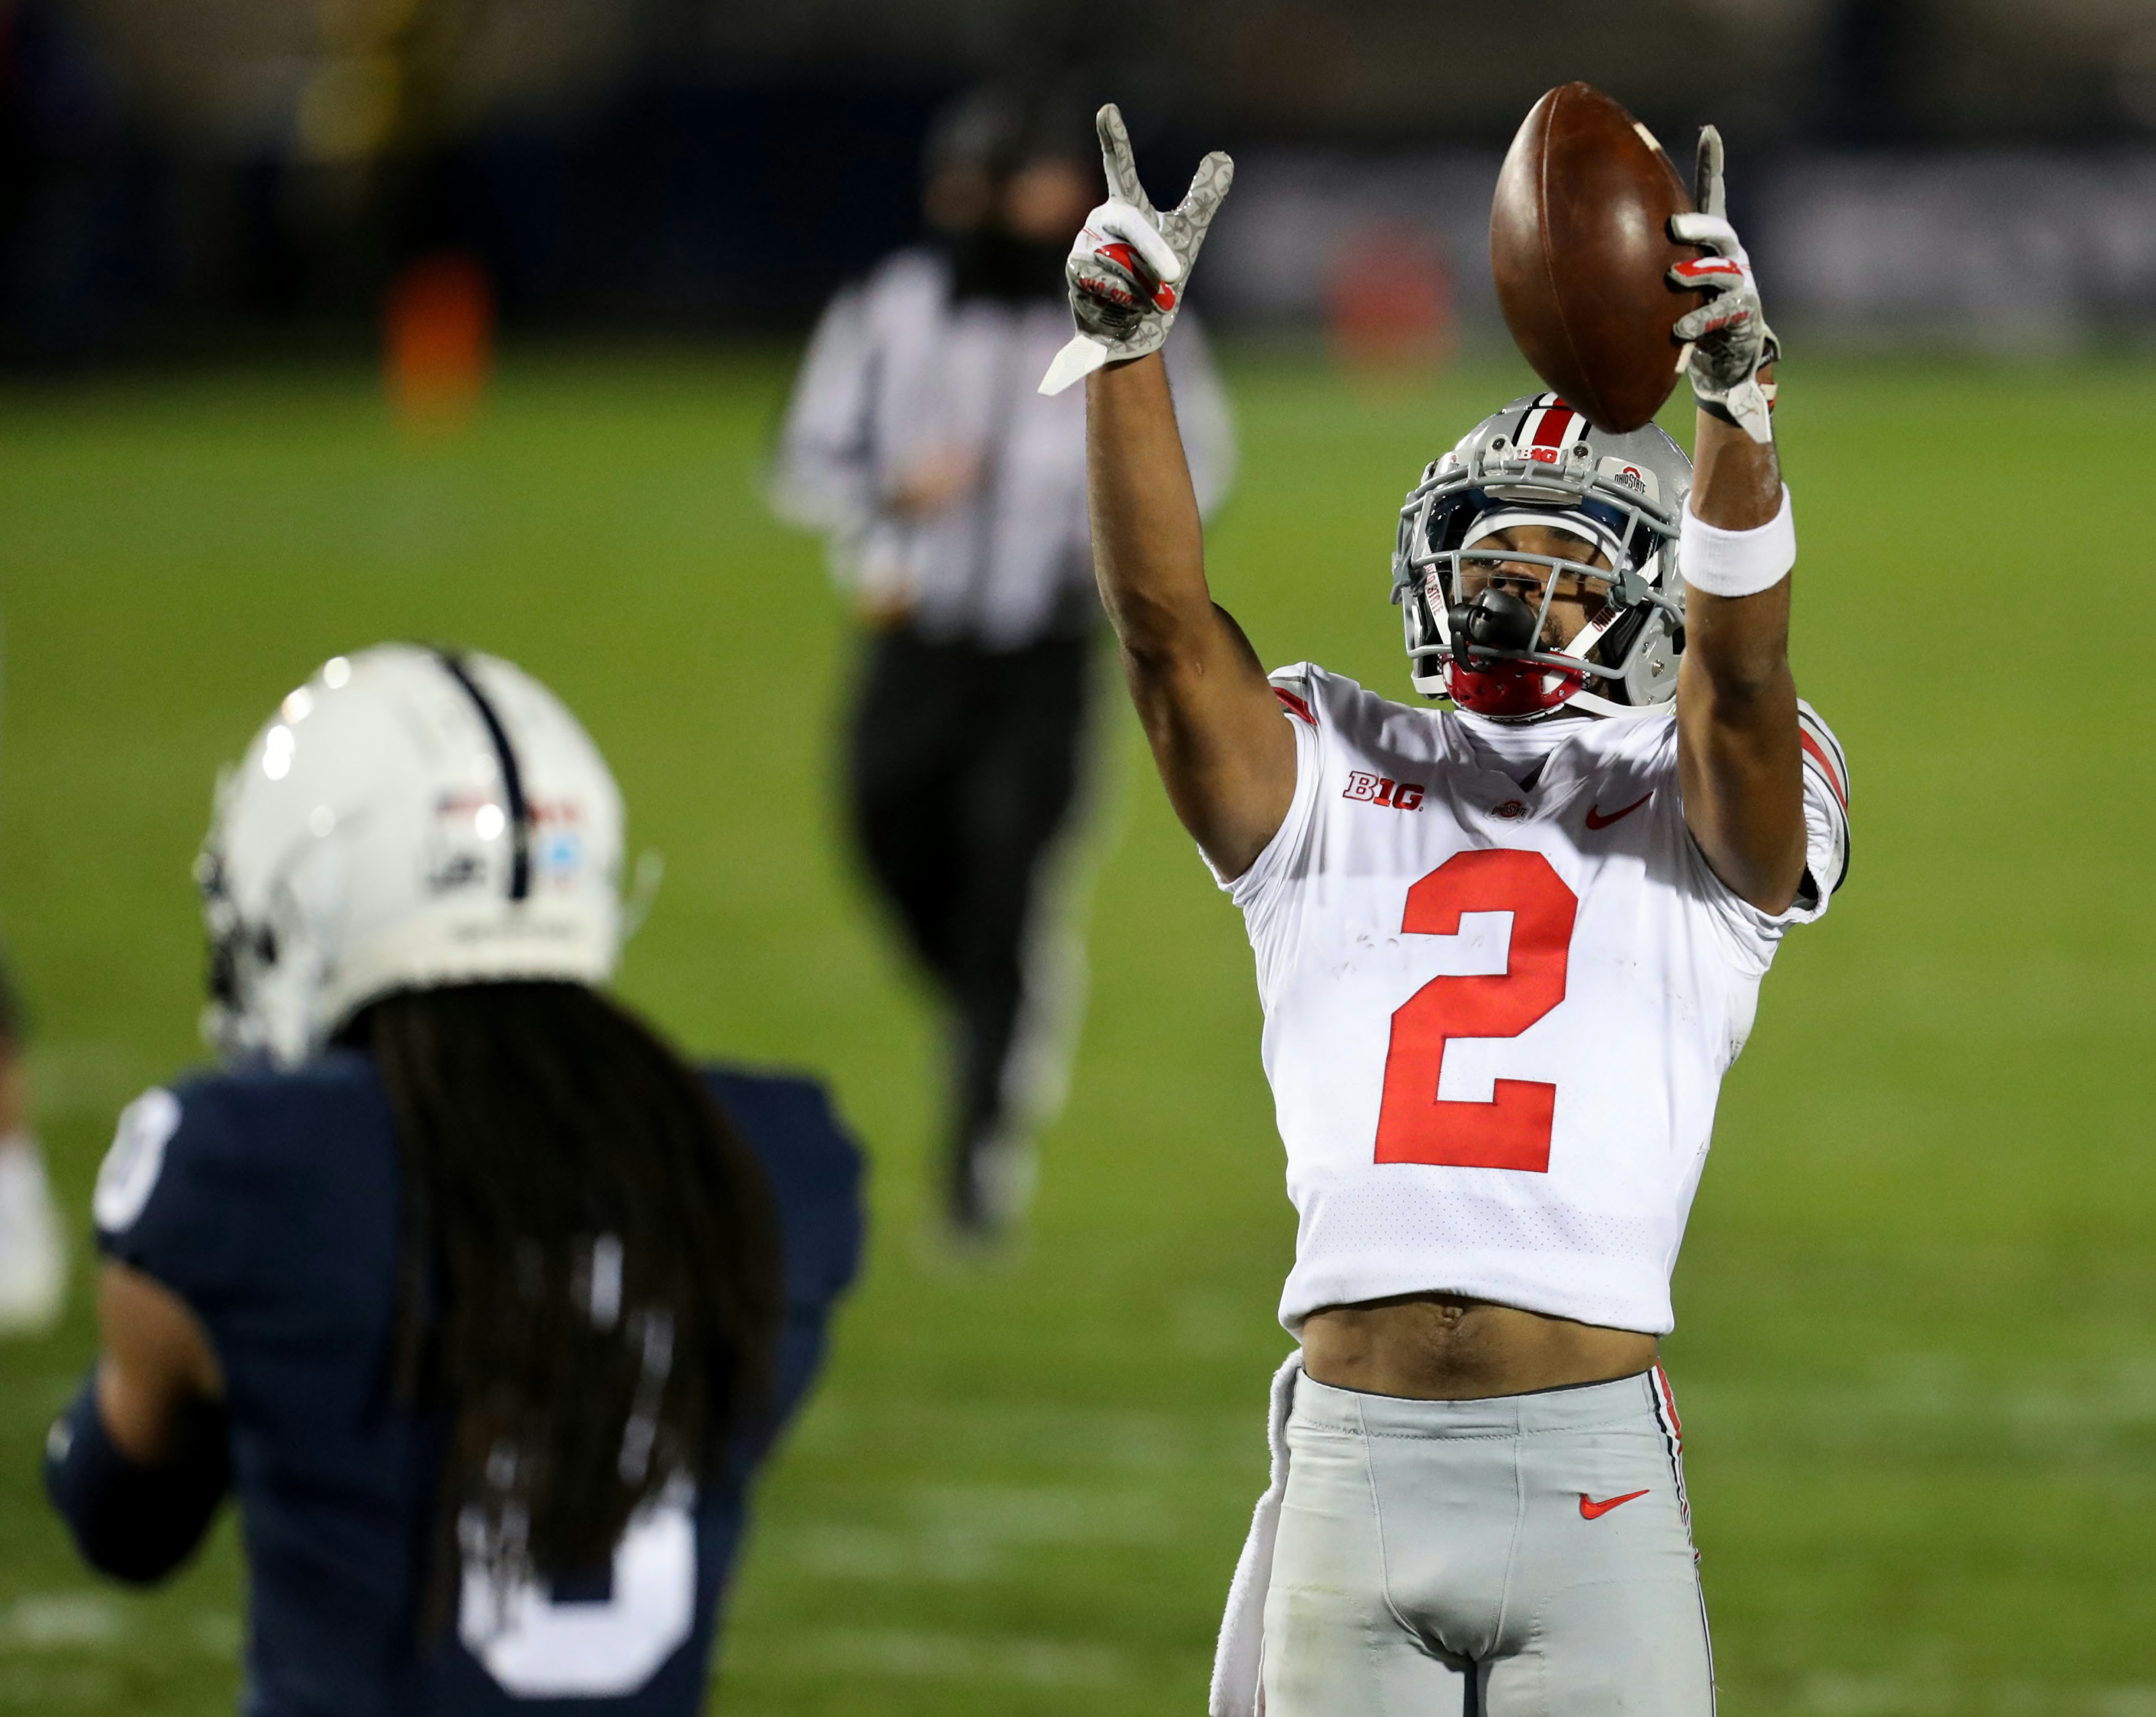 Ohio State Football: Chris Olave expected to enter 2021 NFL Draft